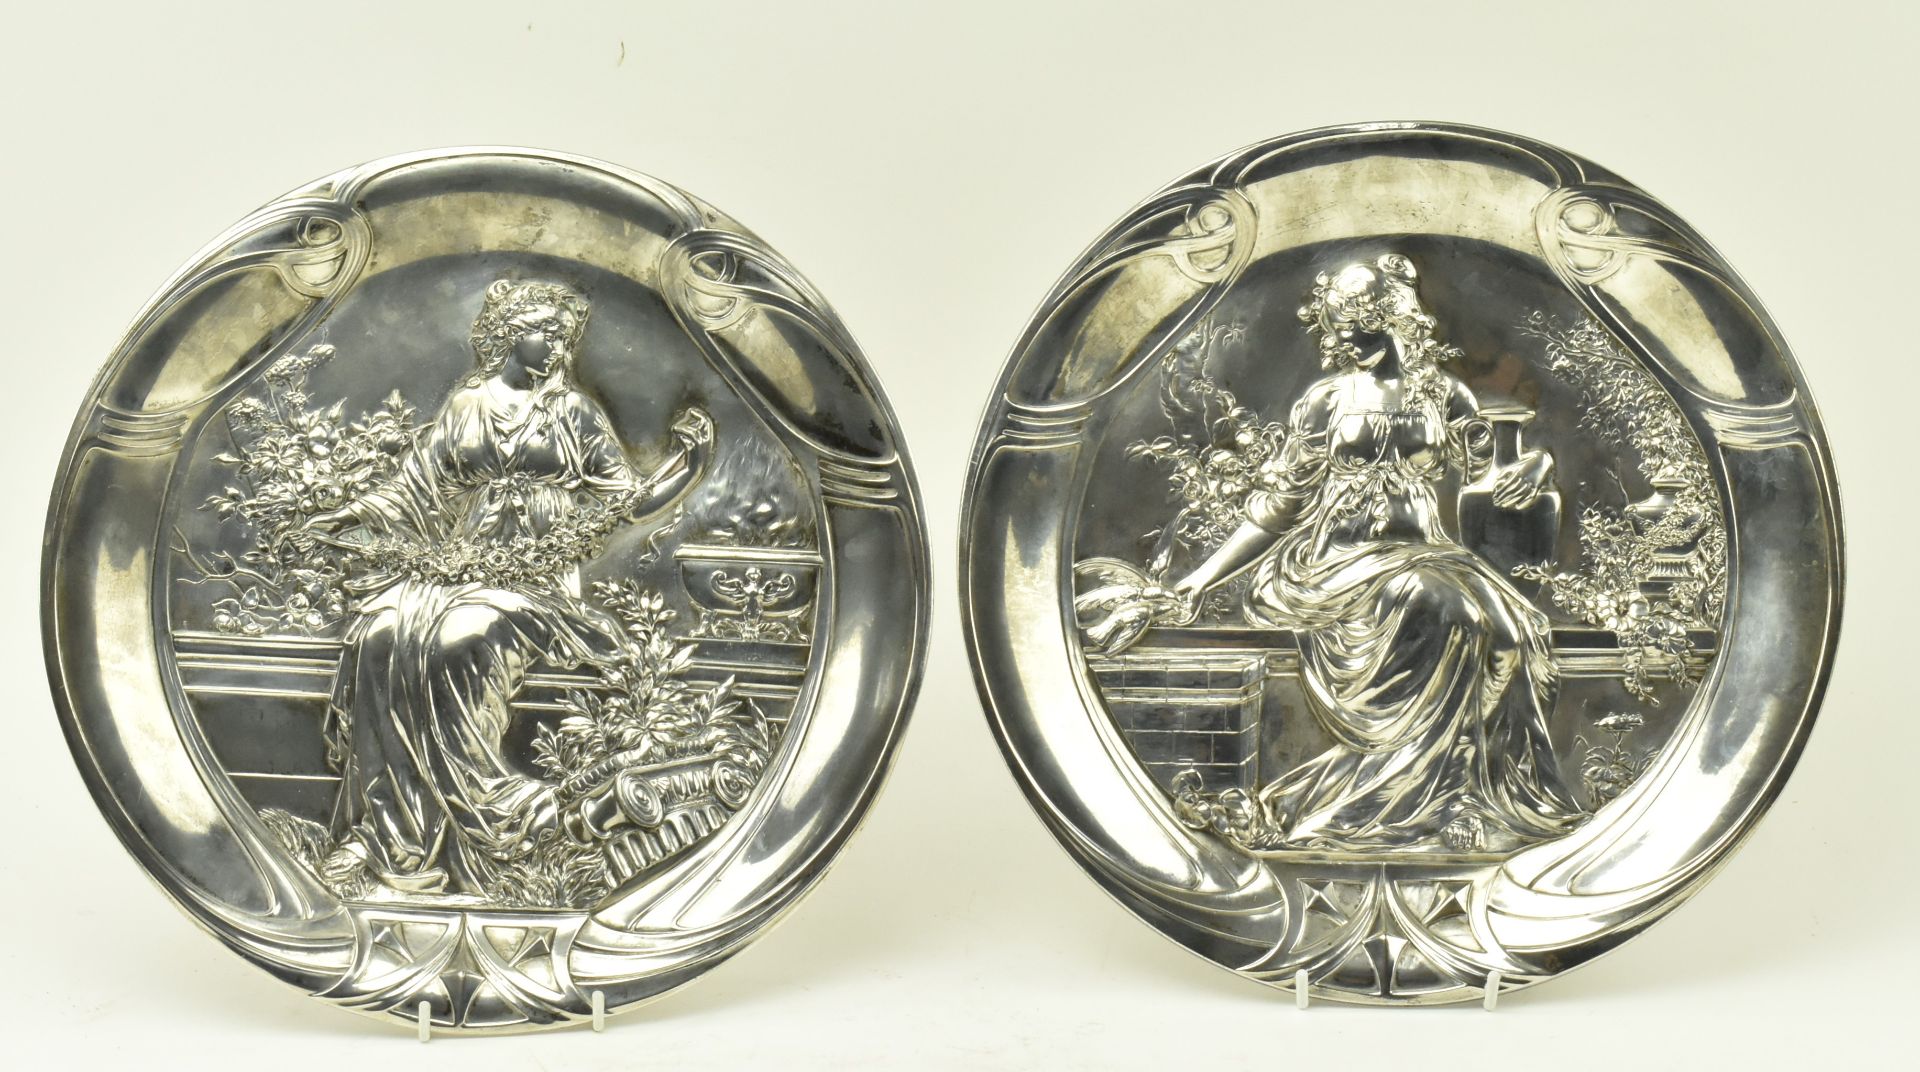 PAIR OF WMF ART NOUVEAU SILVER PLATED ALLEGORICAL CHARGERS - Image 2 of 9